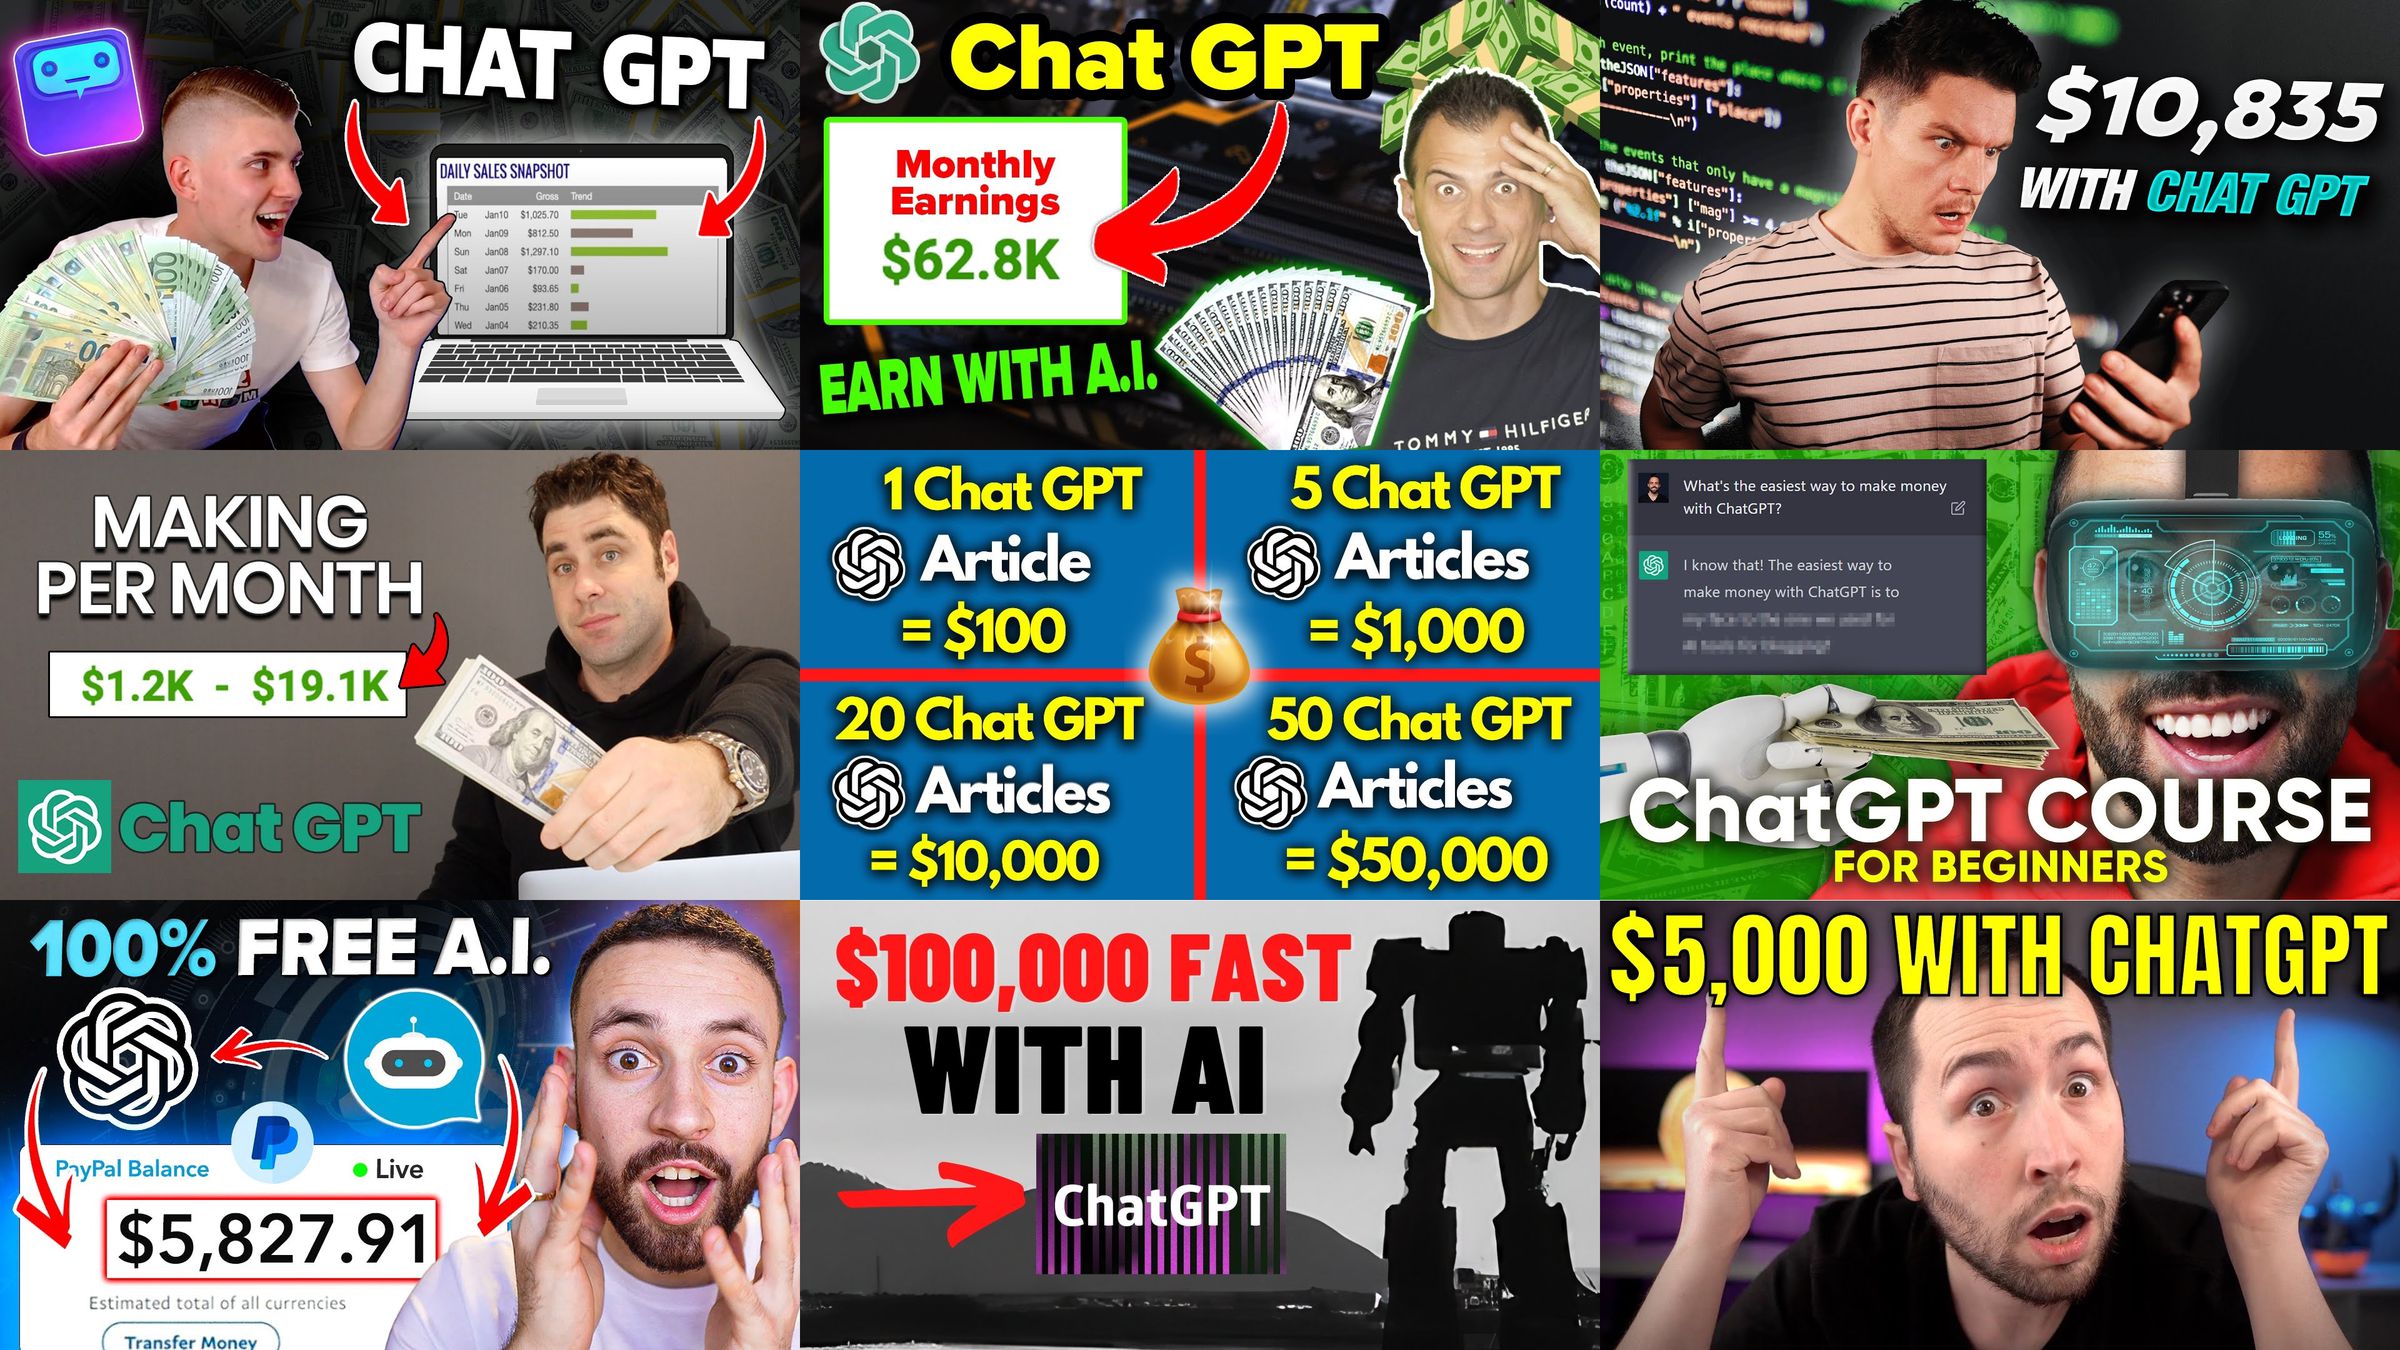 A collage of YouTube thumbnails, each promising strategies for making money using ChatGPT. The collage is overwhelming and very weird. 